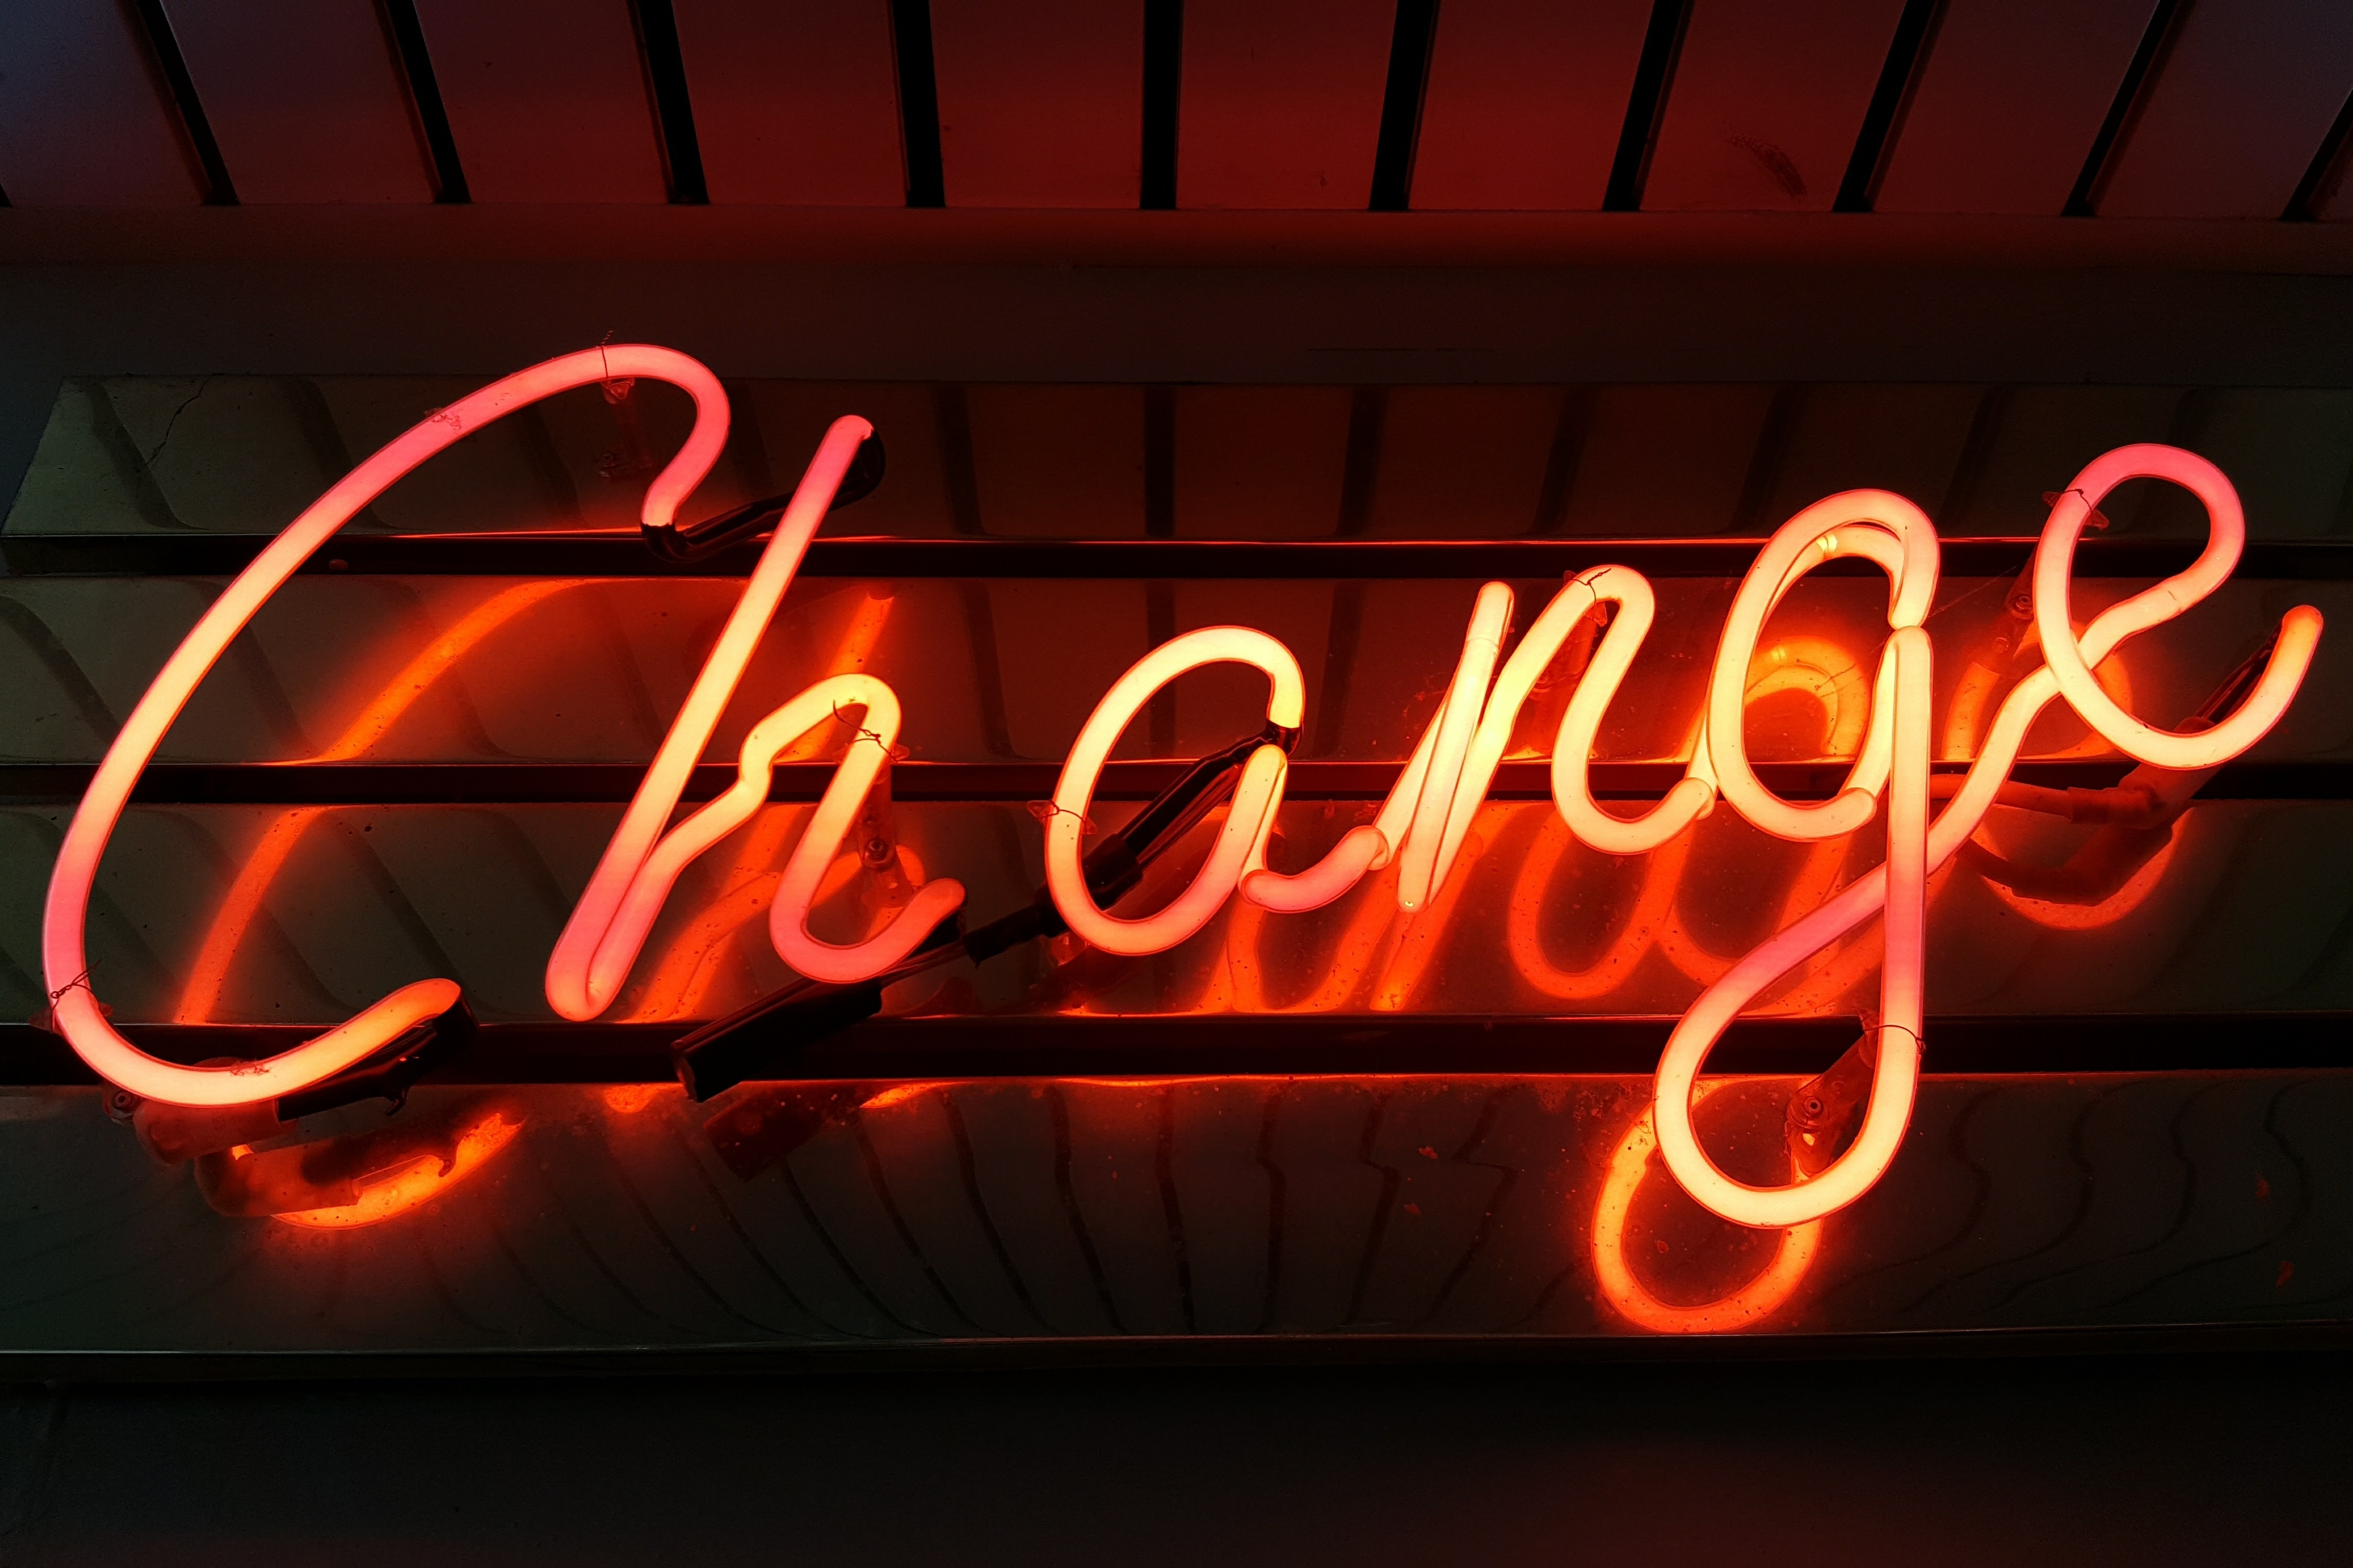 a neon sign lights up the word "Change"